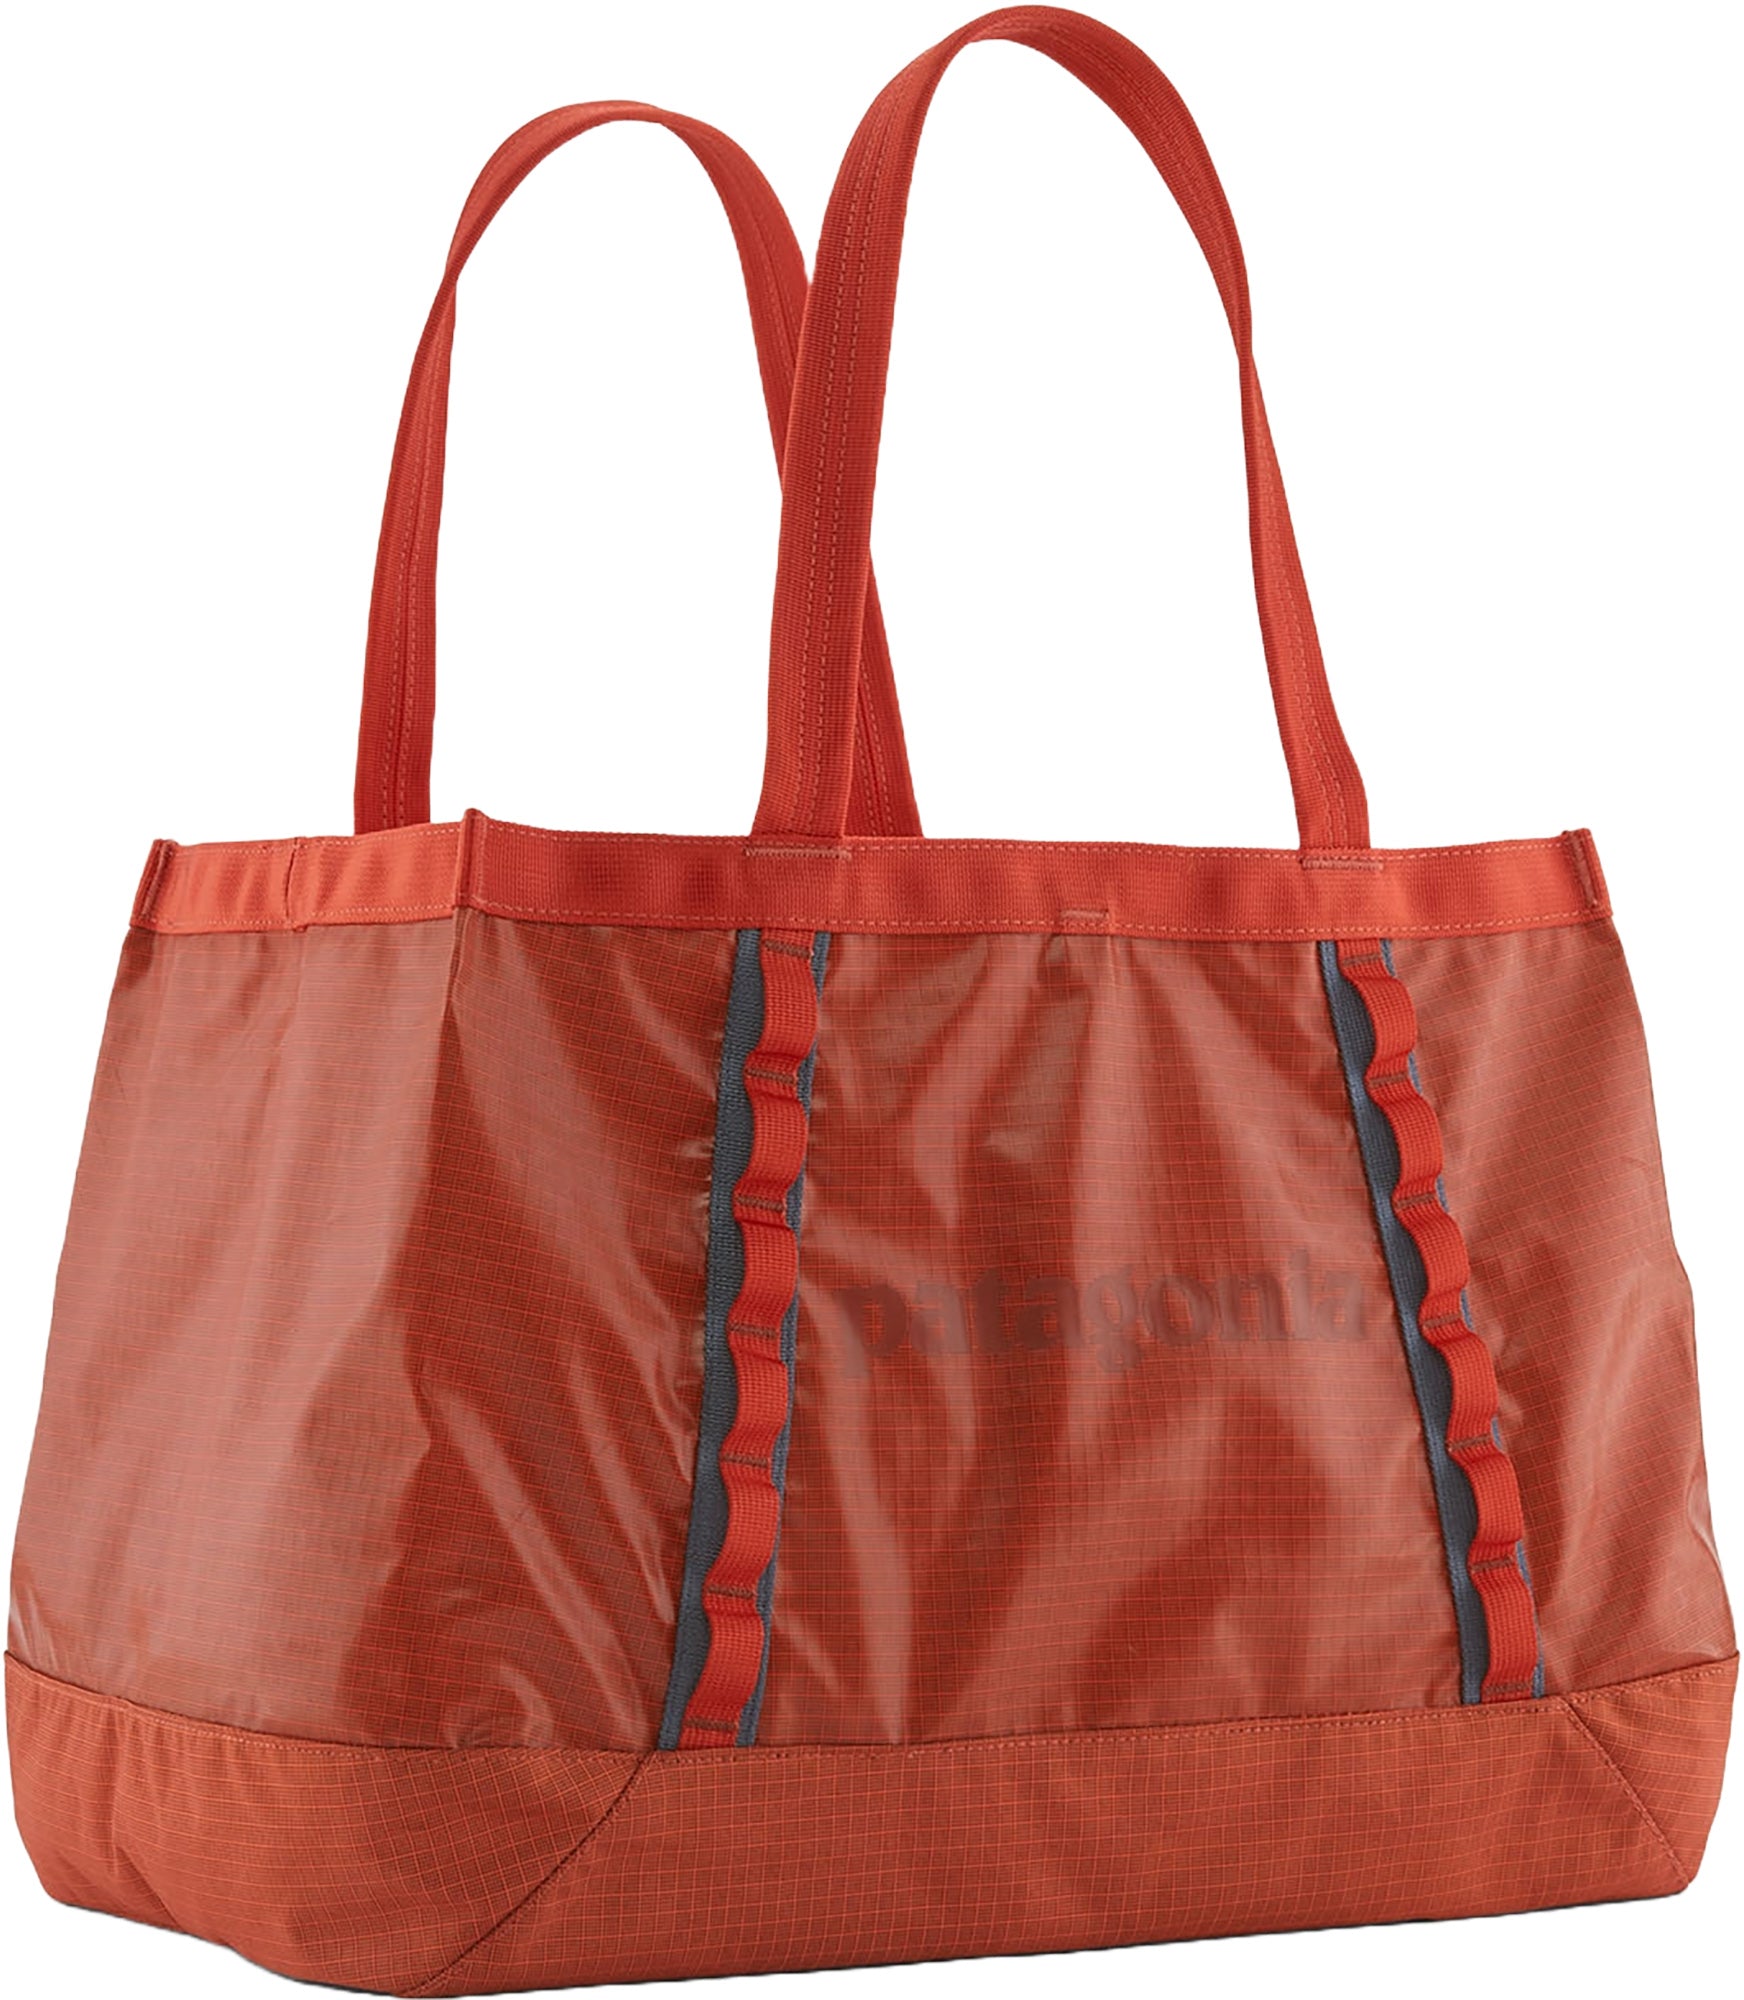 Women's Yoga Tote Bag, Oversized, Recycled Nylon/Polyester, Water